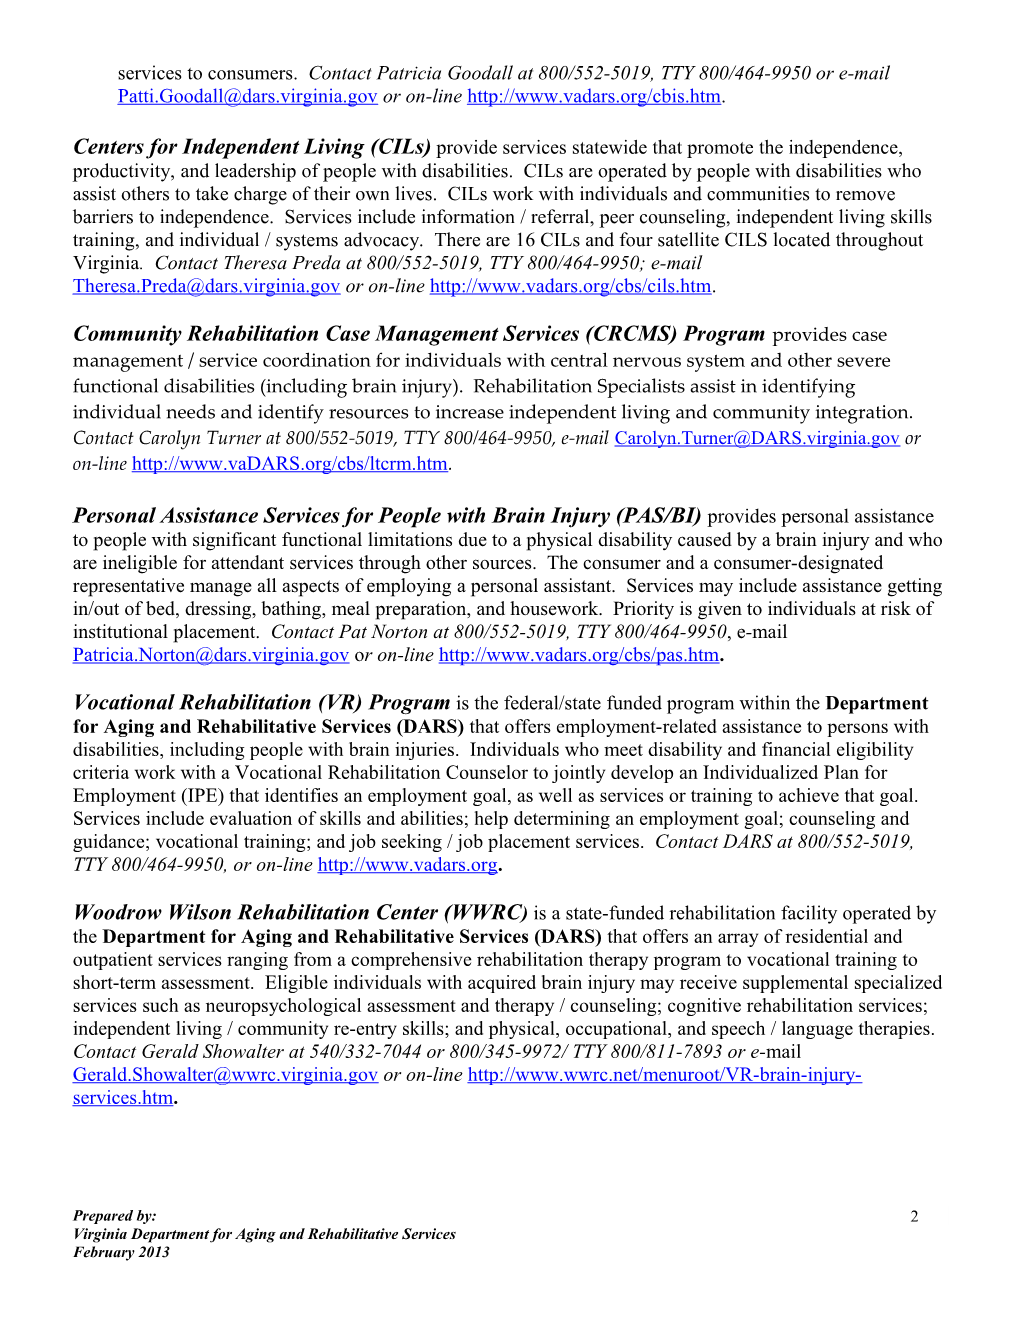 State-Funded Services for Individuals with Brain Injuries in Virginia (2-04)